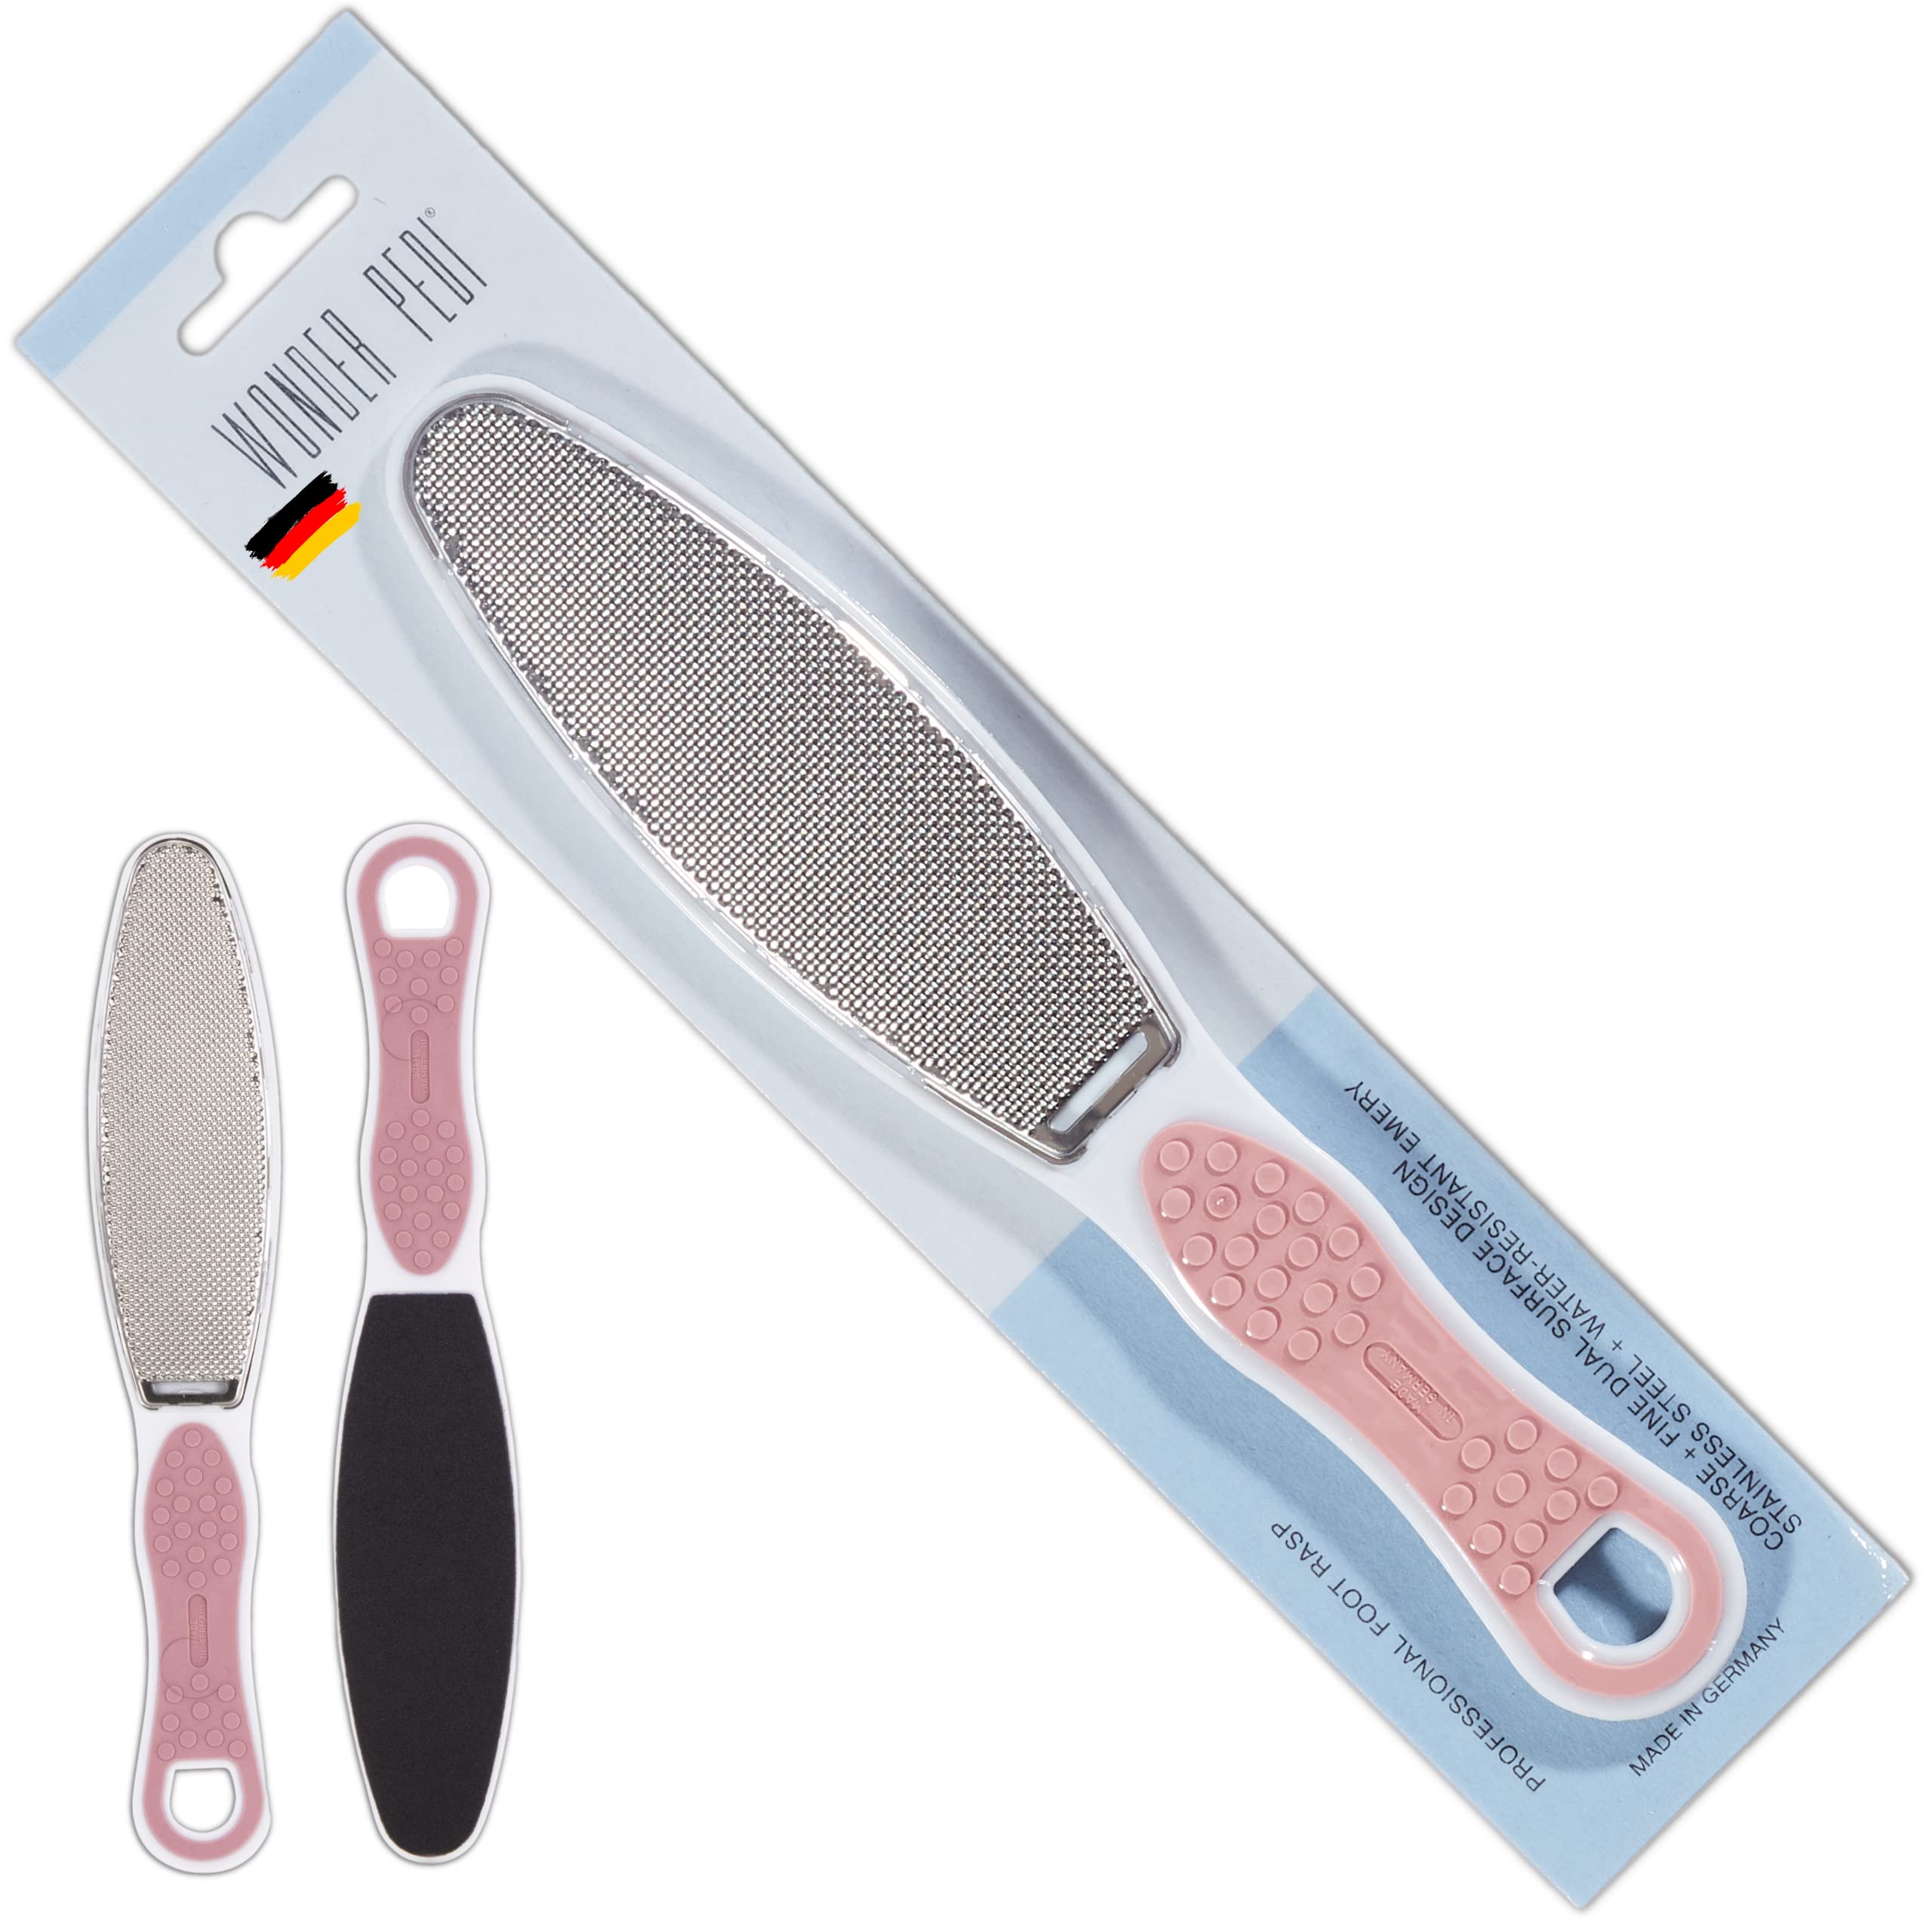 Wonder Pedi Double Sided Foot File - Emery and Stainless Steel